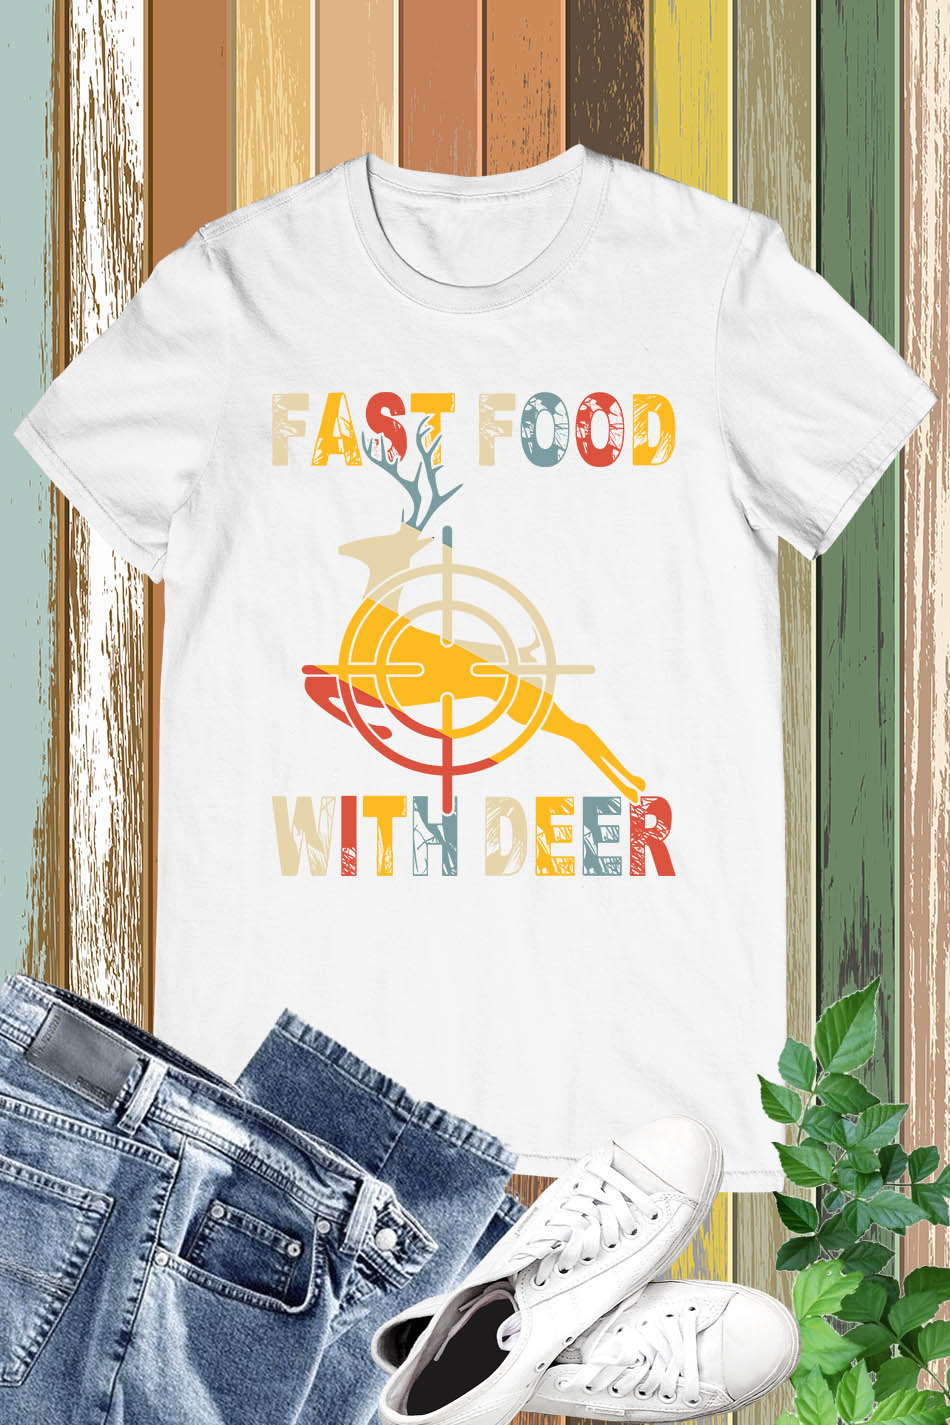 Fast Food with Deer Shirts